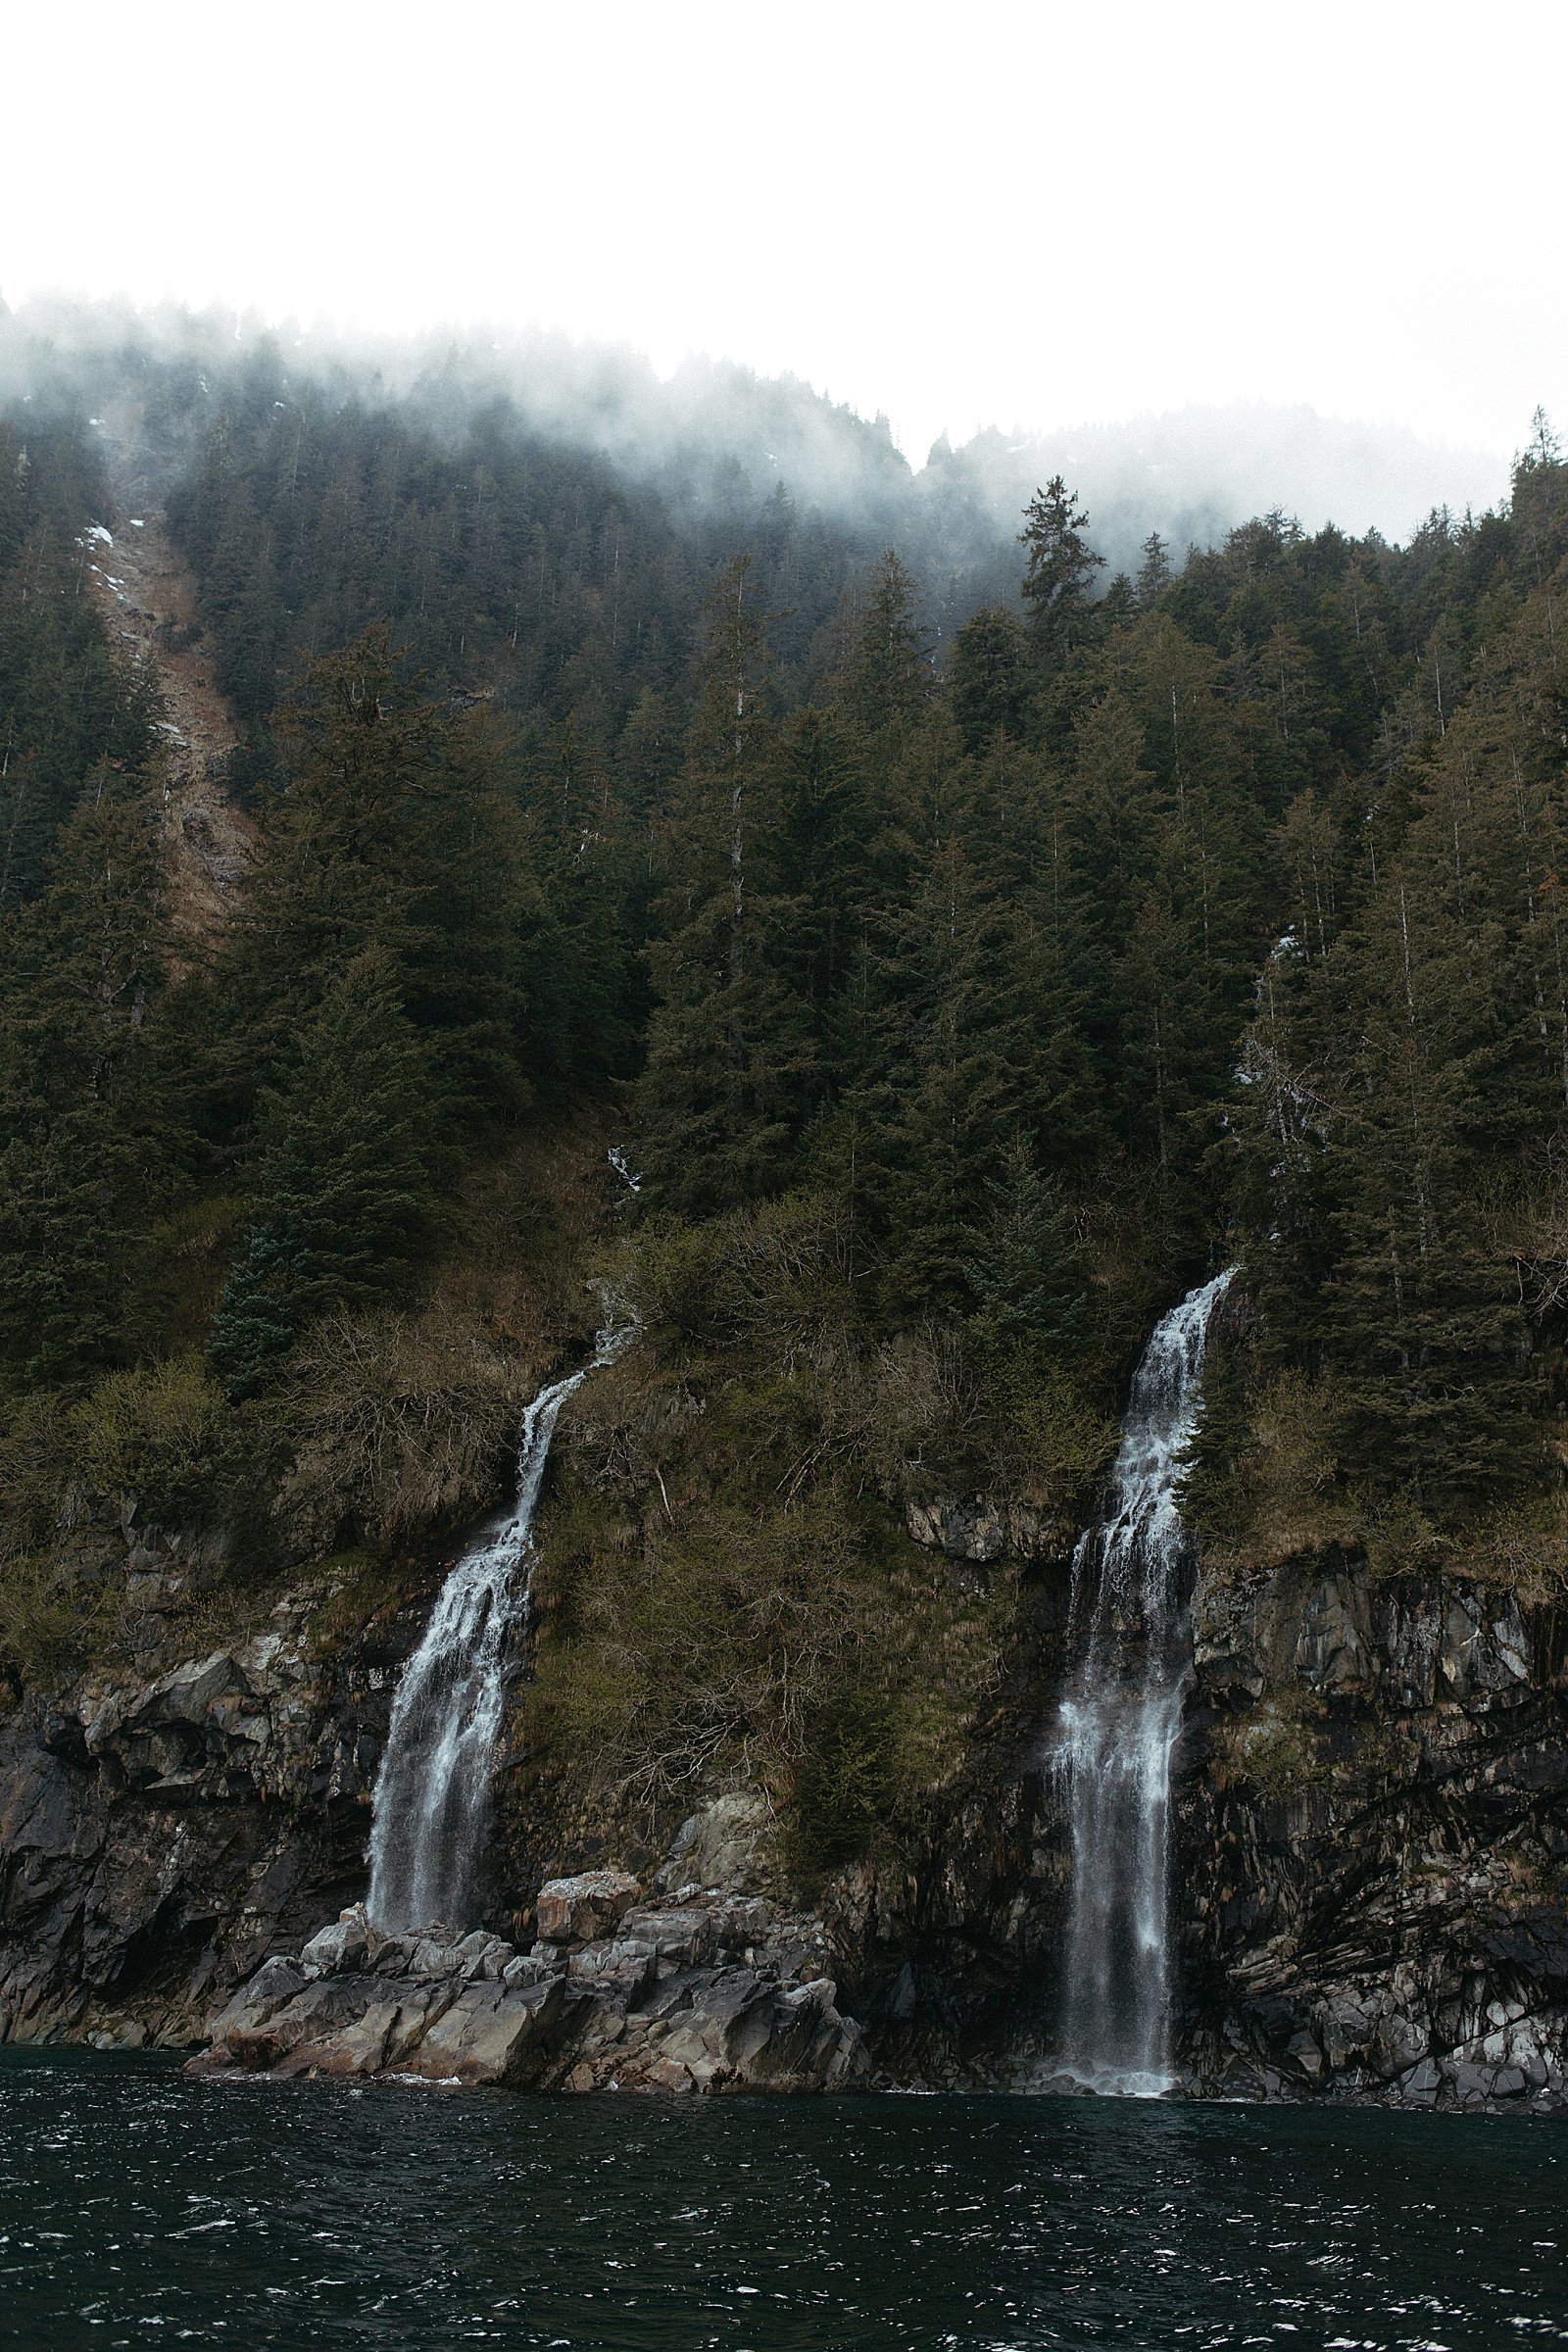  Large waterfalls off the side of a mountain into the ocean by Rachel Struve Photography 